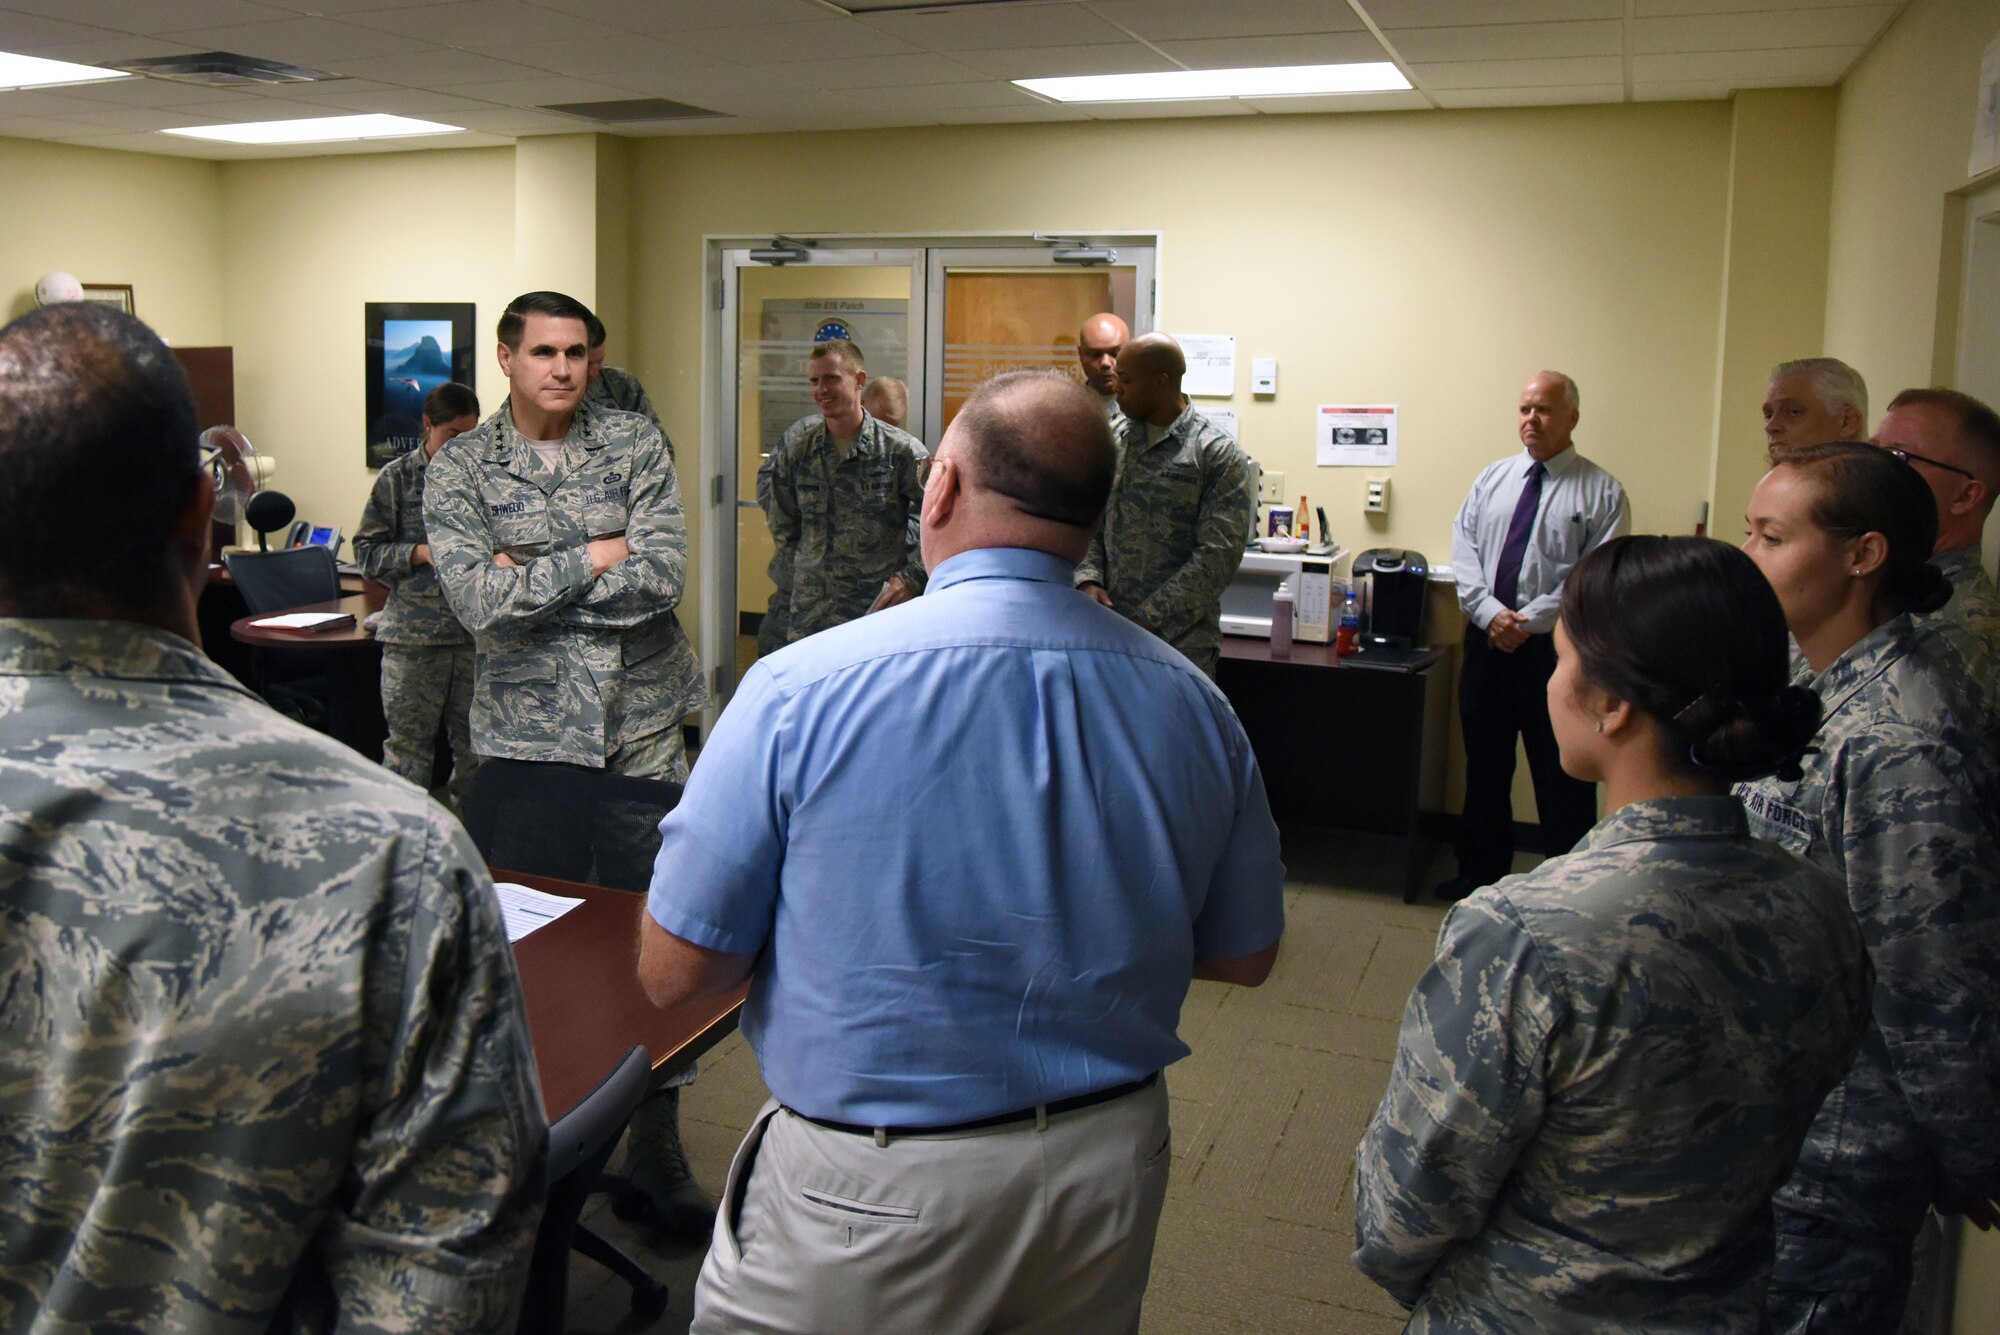 U.S. Air Force Lt. Gen. Bradford J. “BJ” Shwedo, Office of the Secretary of the Air Force, Chief Information Dominance and Chief Information Officer, at the Pentagon, Washington, D.C., meets with members at the 85th Engineering Installation Squadron during a tour in Maltby Hall at Keesler Air Force Base, Mississippi, May 22, 2018. In order to become more familiar with Keesler’s training mission, Shwedo also toured squadrons within the 81st Training Group. (U.S. Air Force photo by Kemberly Groue)